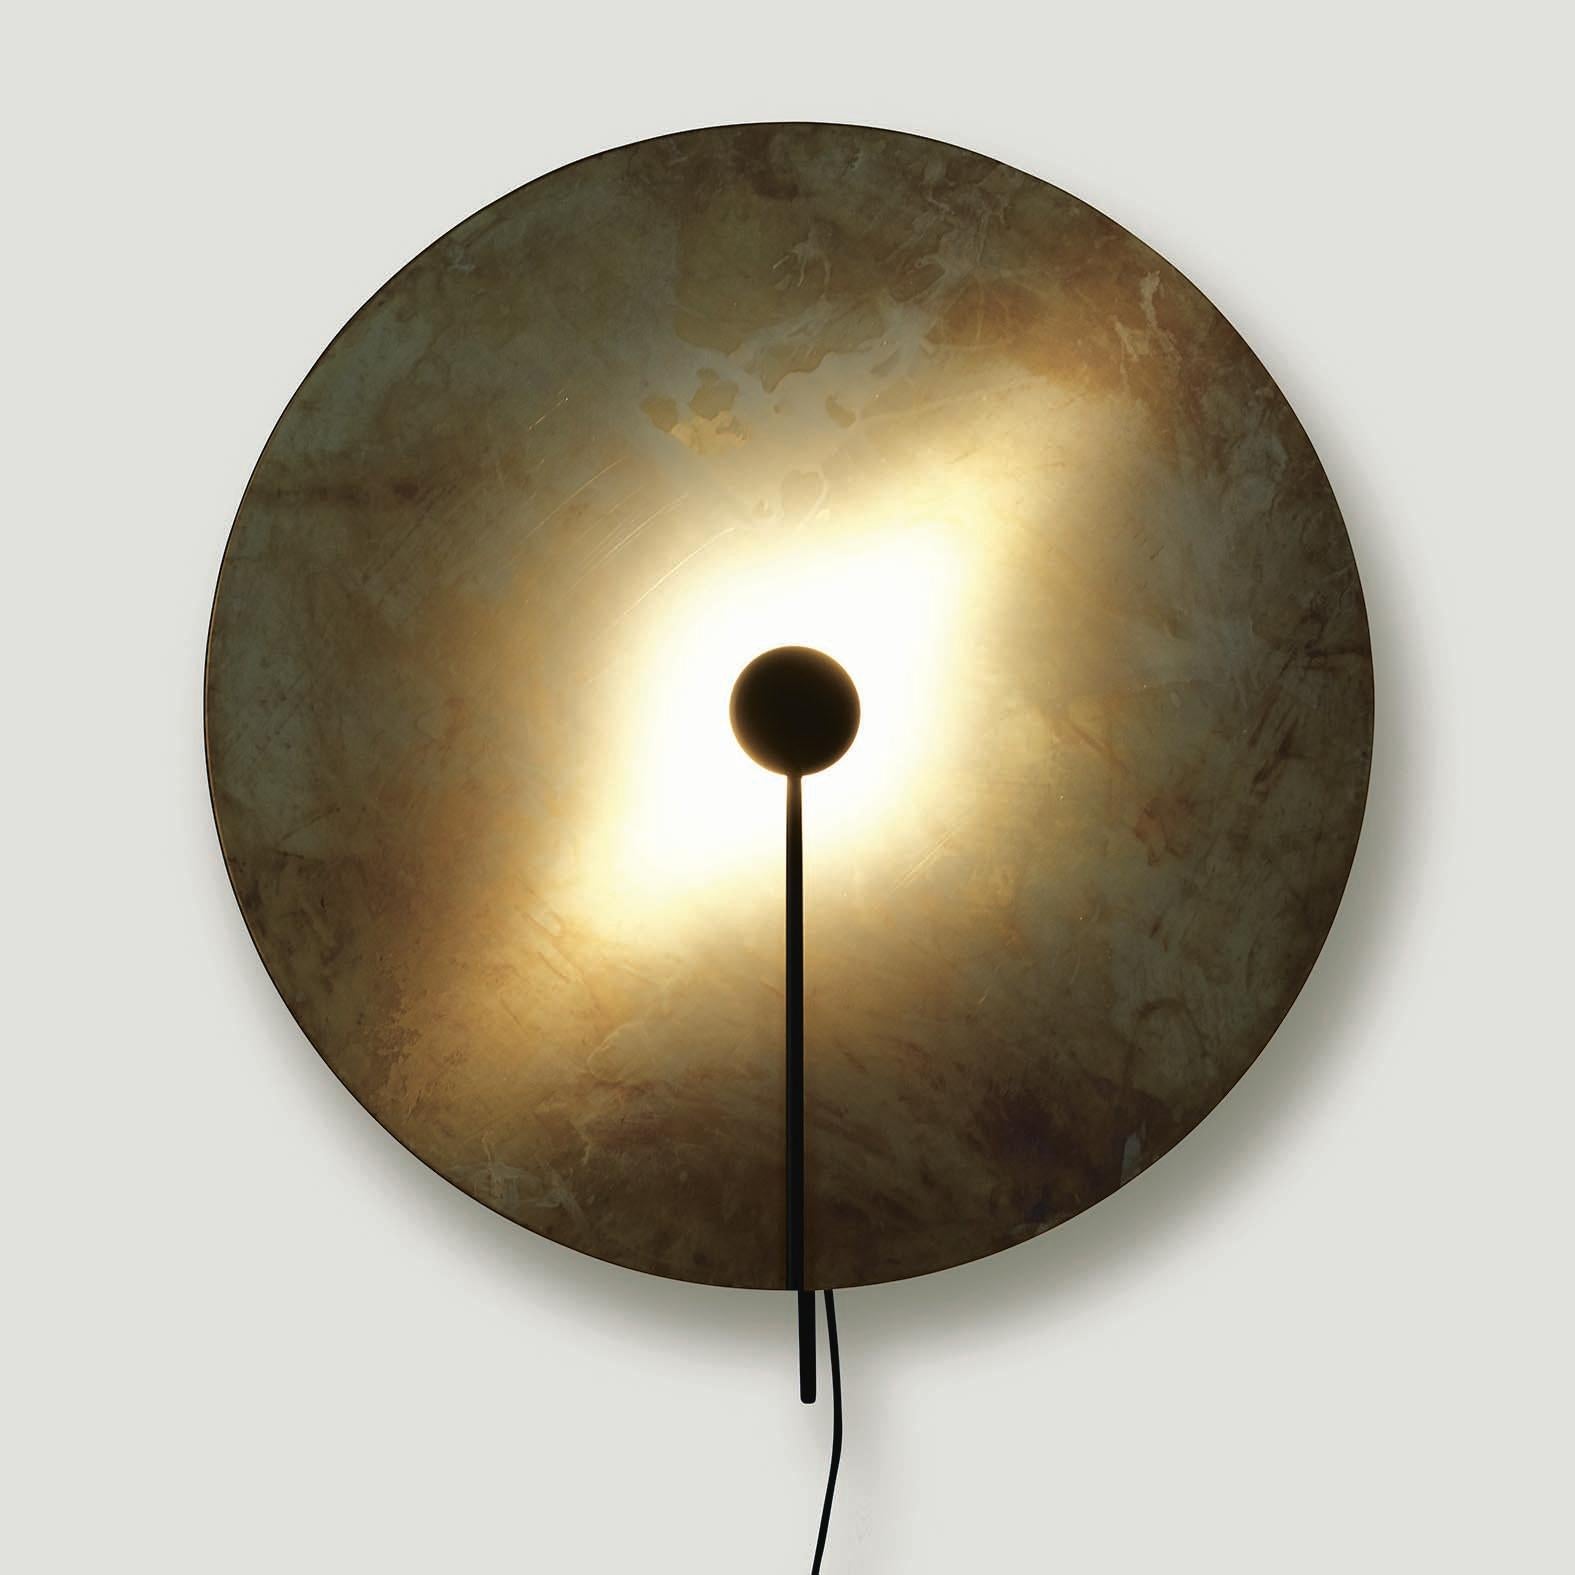 Wall lamp model SOL designed by Sami Kallio and manufactured by Konsthantverk.

The production of lamps, wall lights and floor lamps are manufactured using craftsman’s techniques with the same materials and techniques as the first